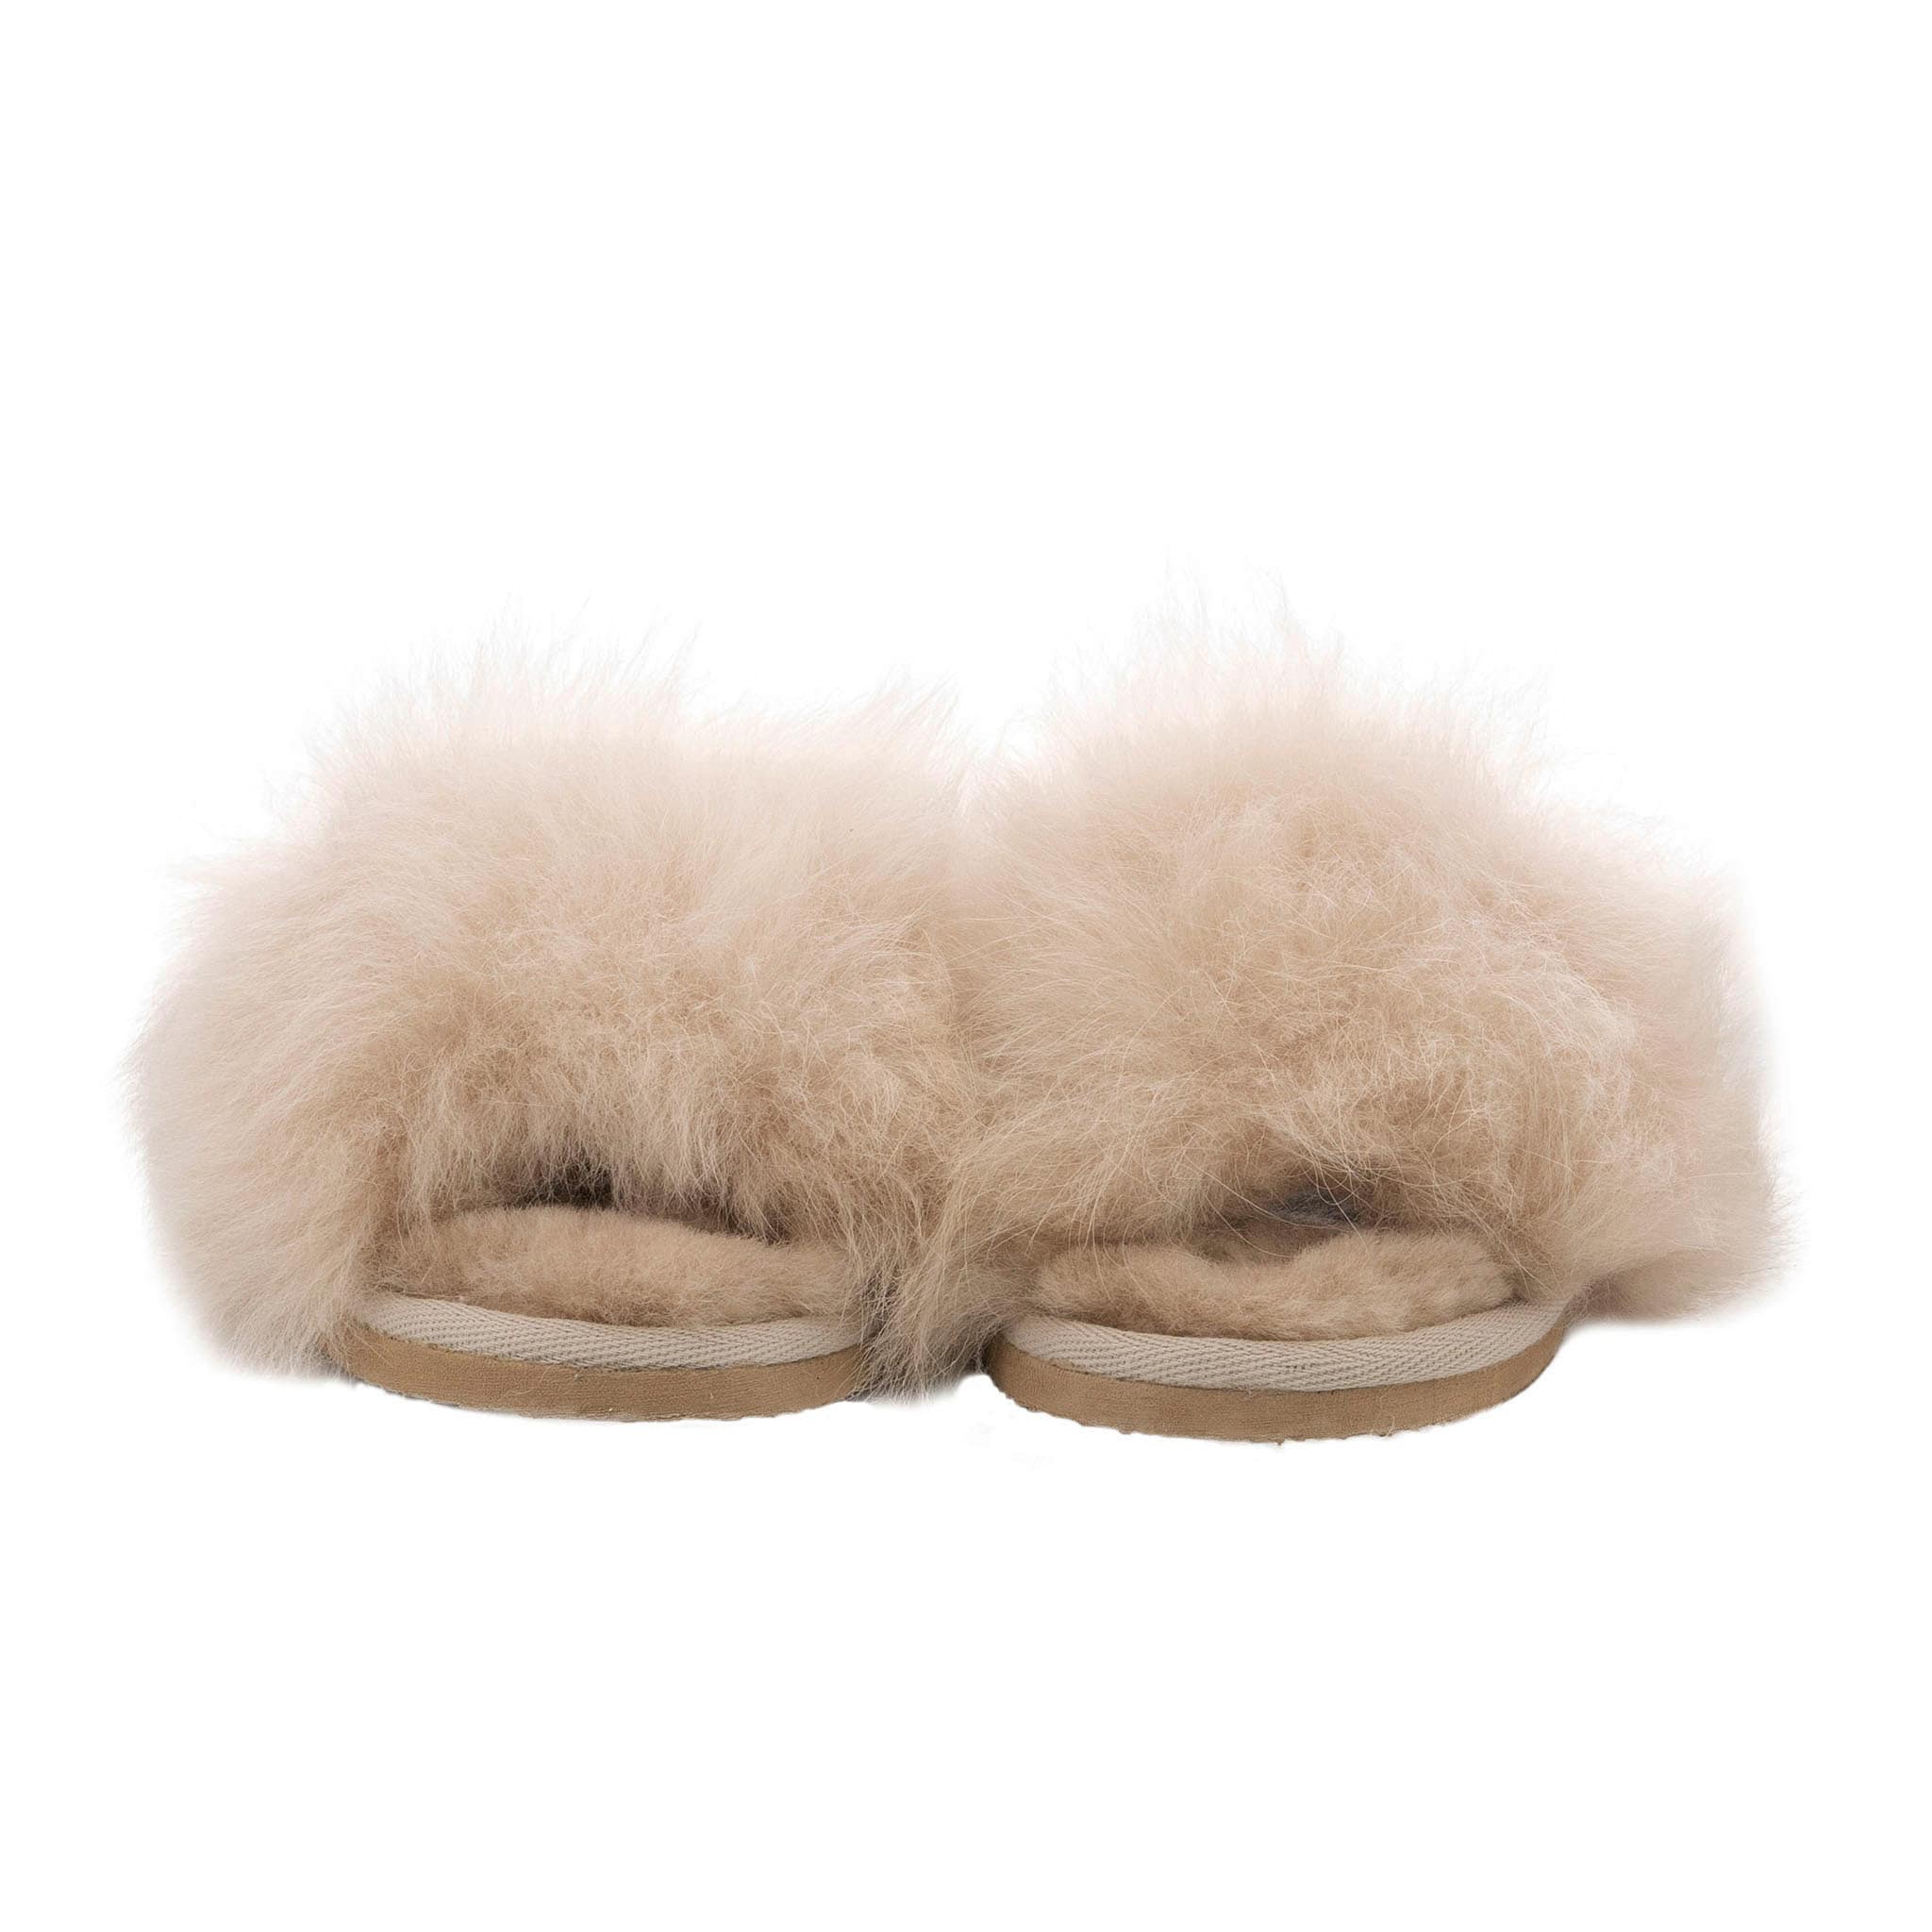 Mariefred slippers